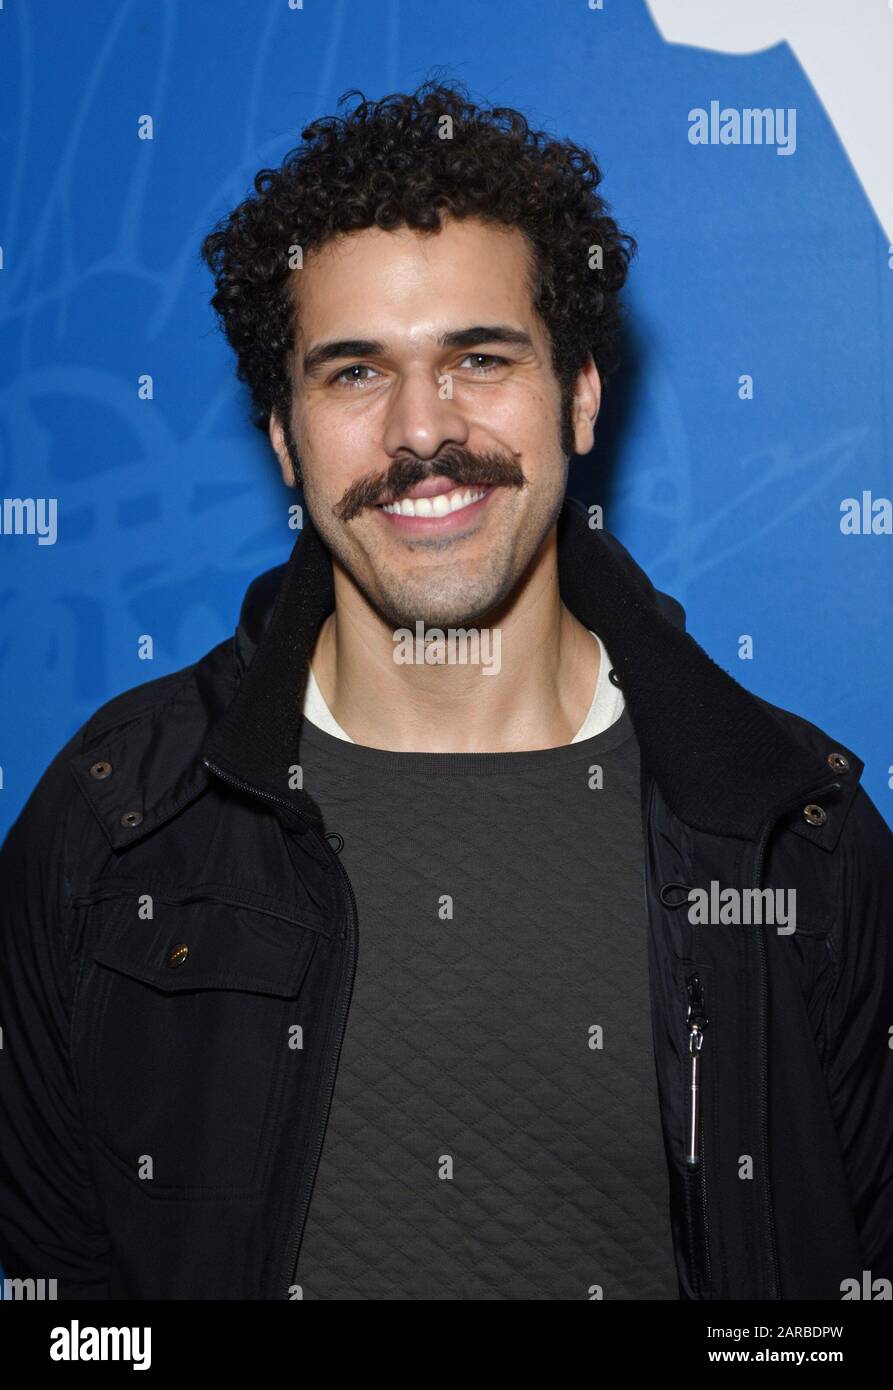 New York, NY, USA. 26th Jan, 2020. Joel Perez in attendance for Bob & Carol & Ted & Alice Cast, Tthe New Group at the Pershing Square Signature Center, New York, NY January 26, 2020. Credit: Derek Storm/Everett Collection/Alamy Live News Stock Photo